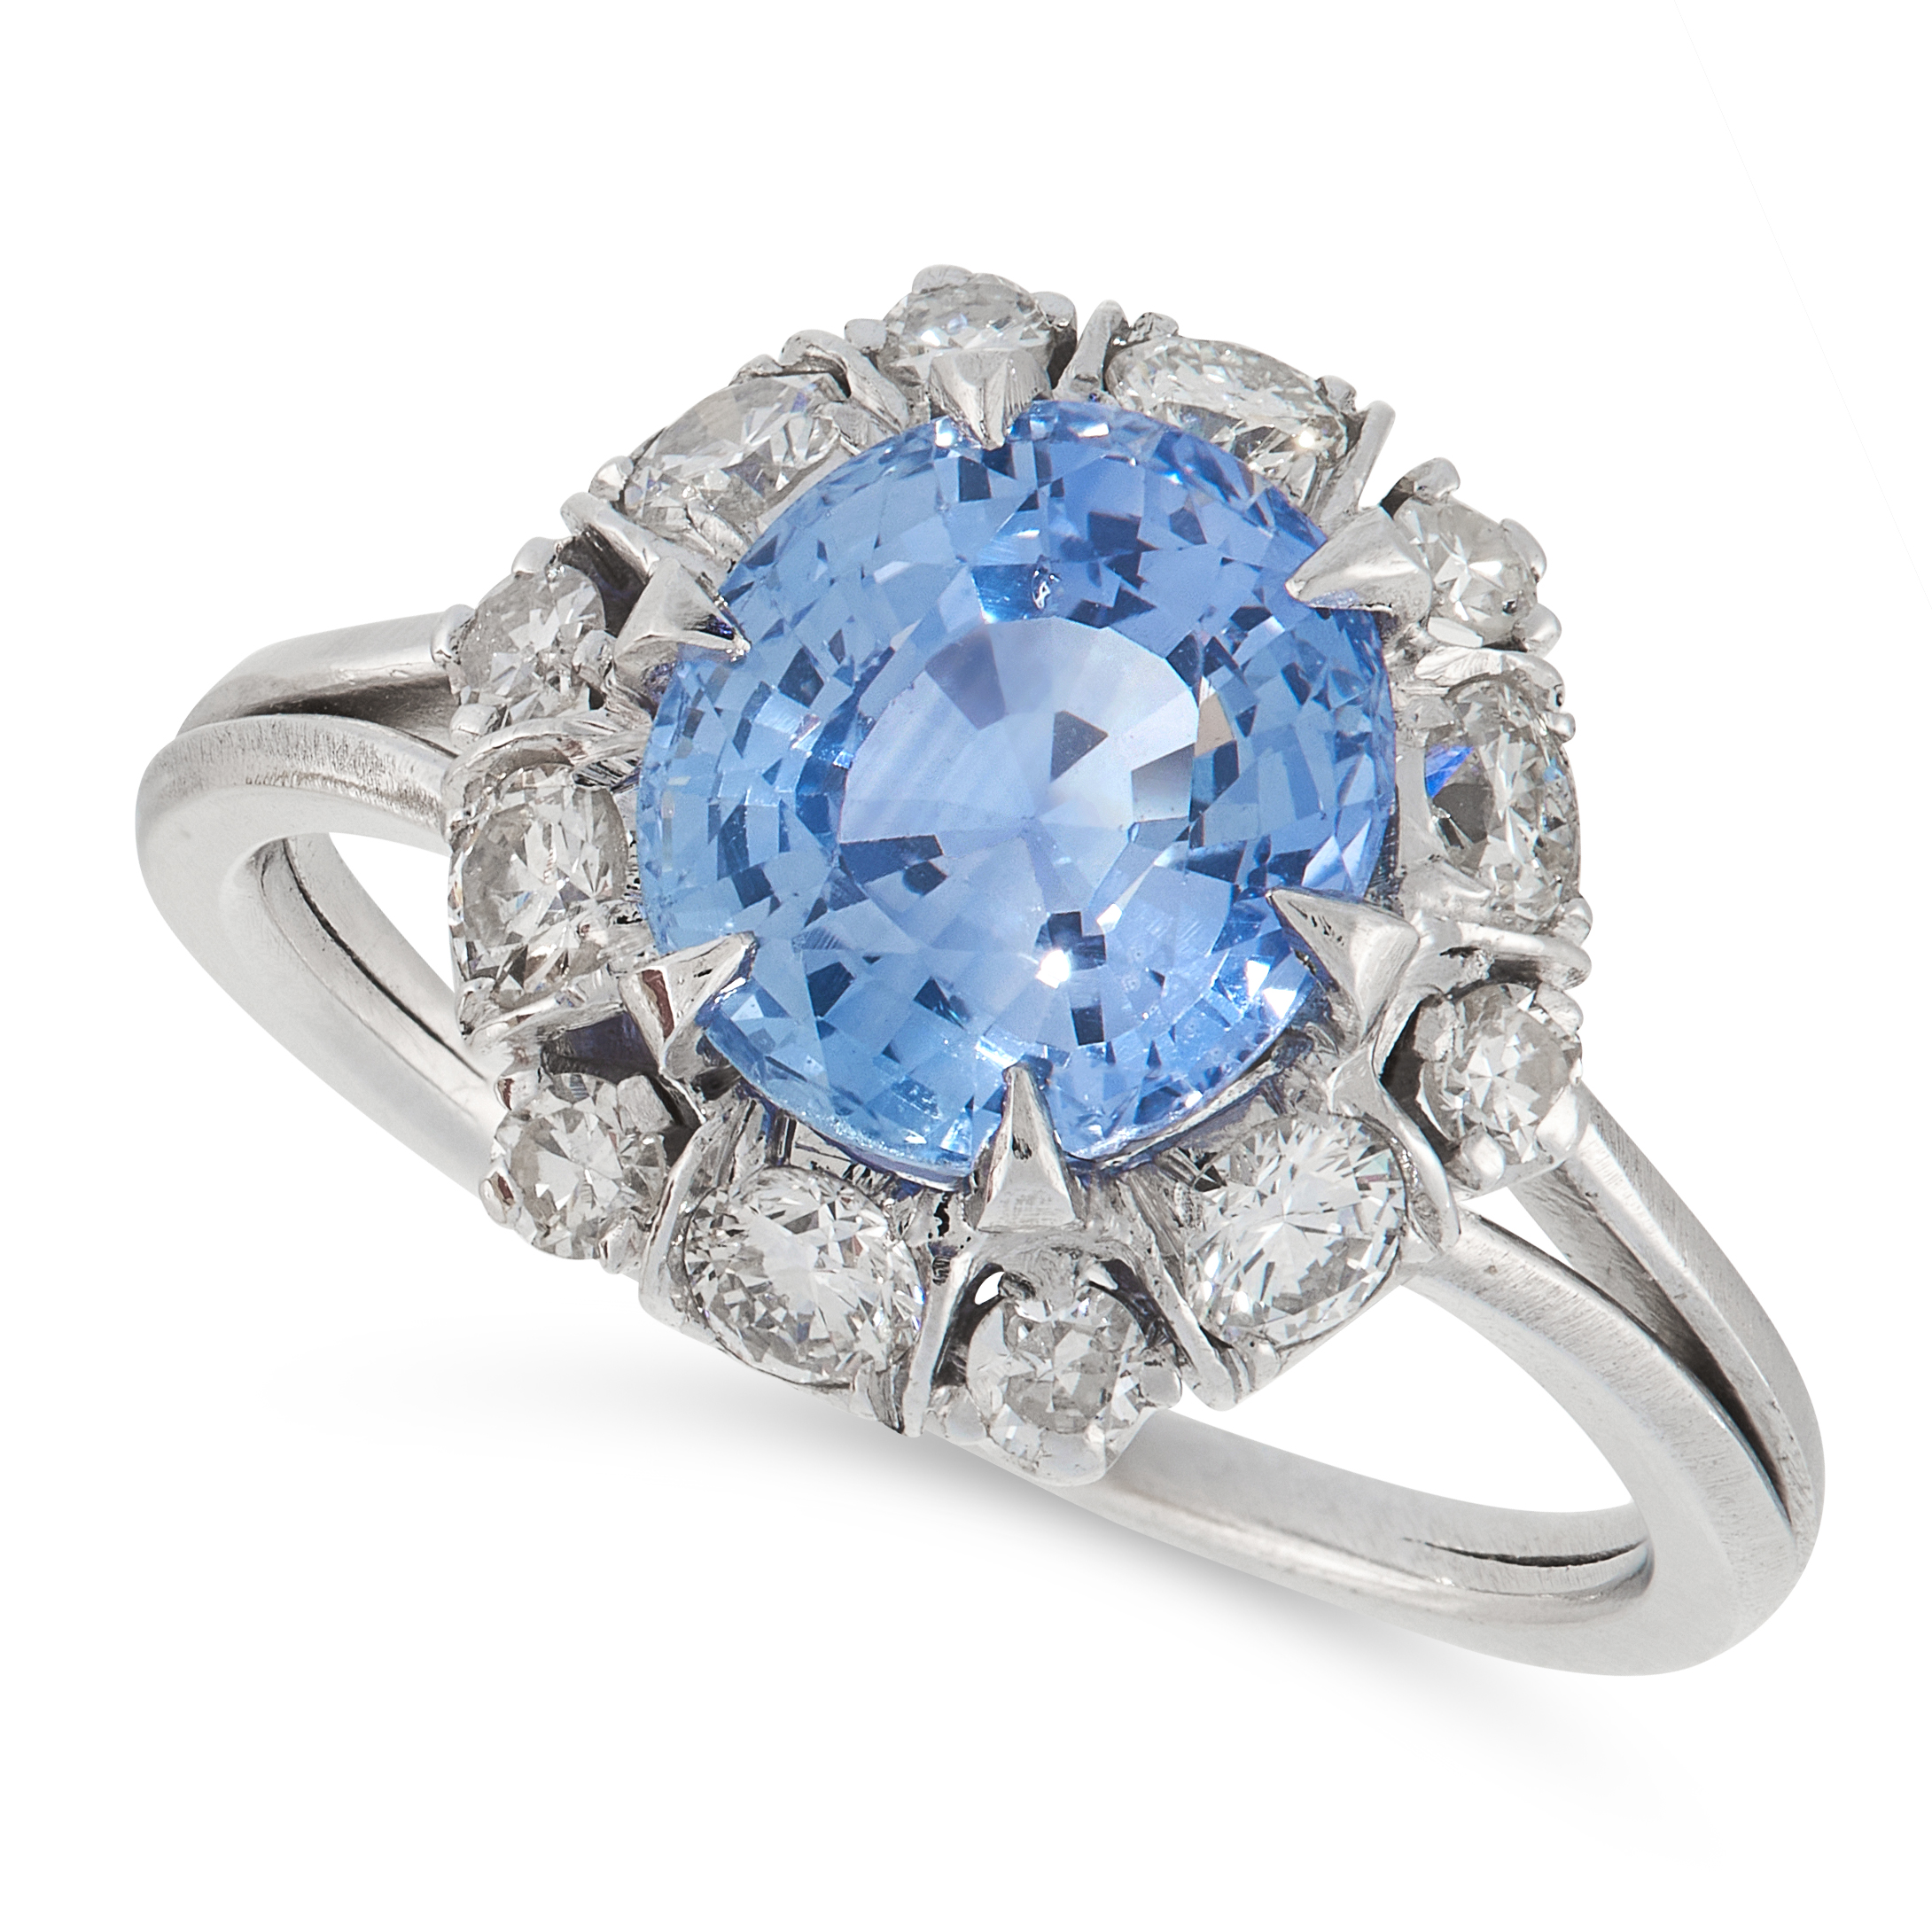 A SAPPHIRE AND DIAMOND CLUSTER RING comprising of an oval cut sapphire of 2.80 carats in a border of